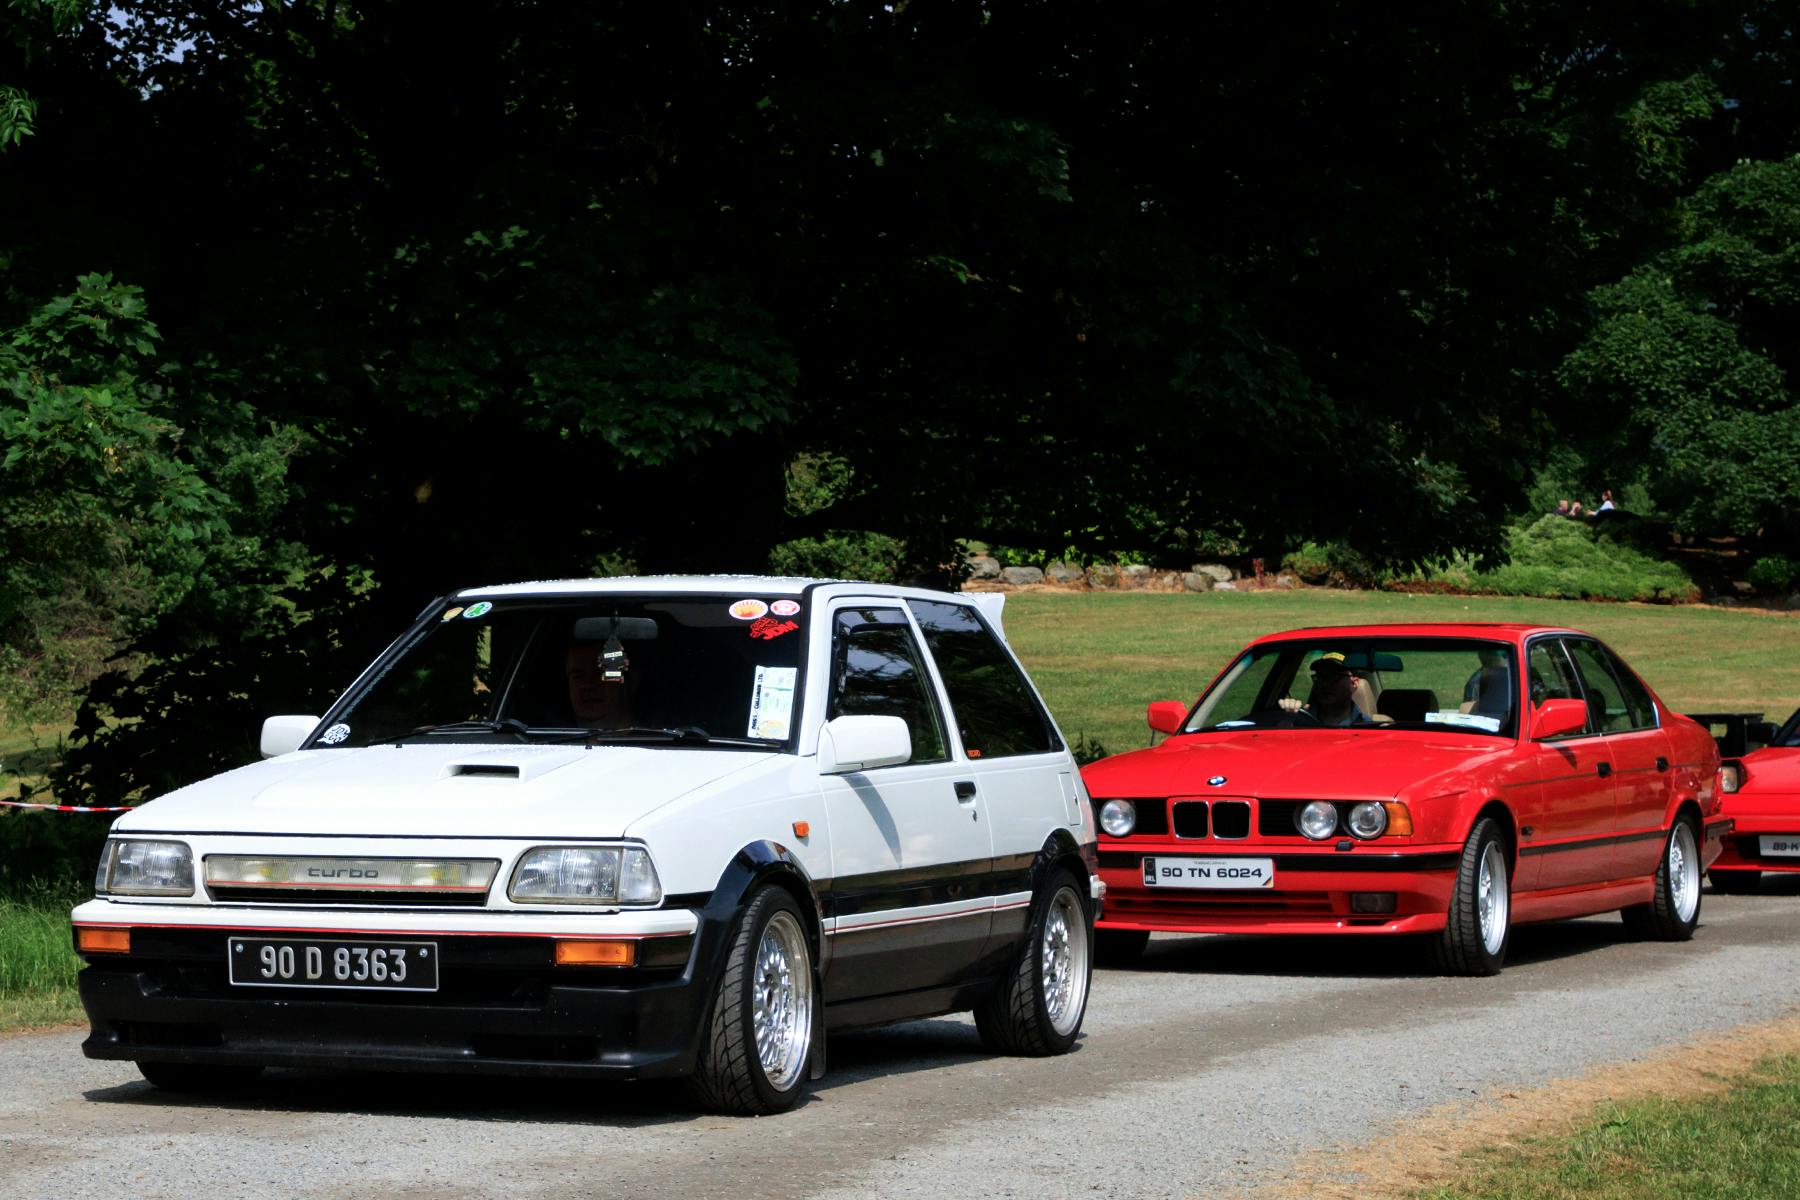 Kilbroney car show Toyota Starlet turbo and BMW M5 behind